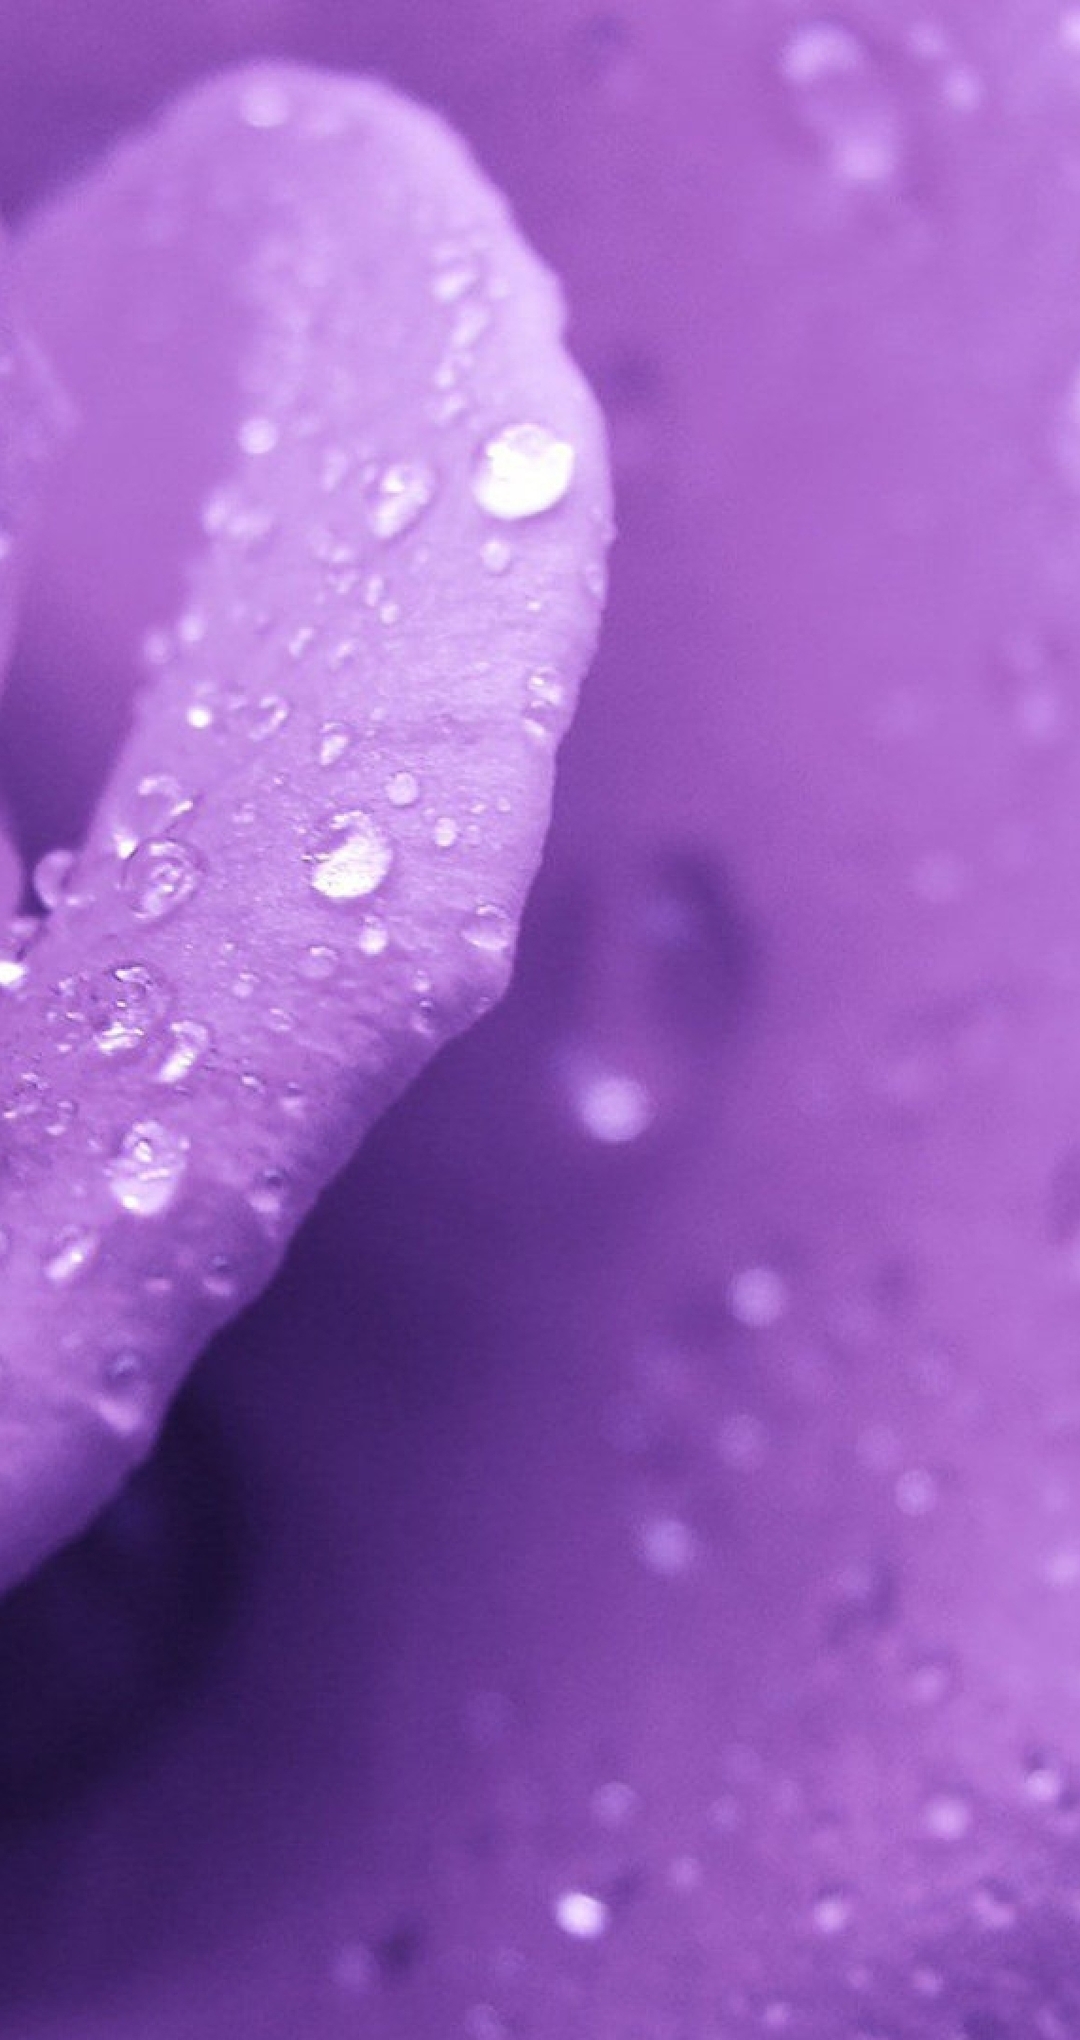 Image: Rose, drops, water, purple background